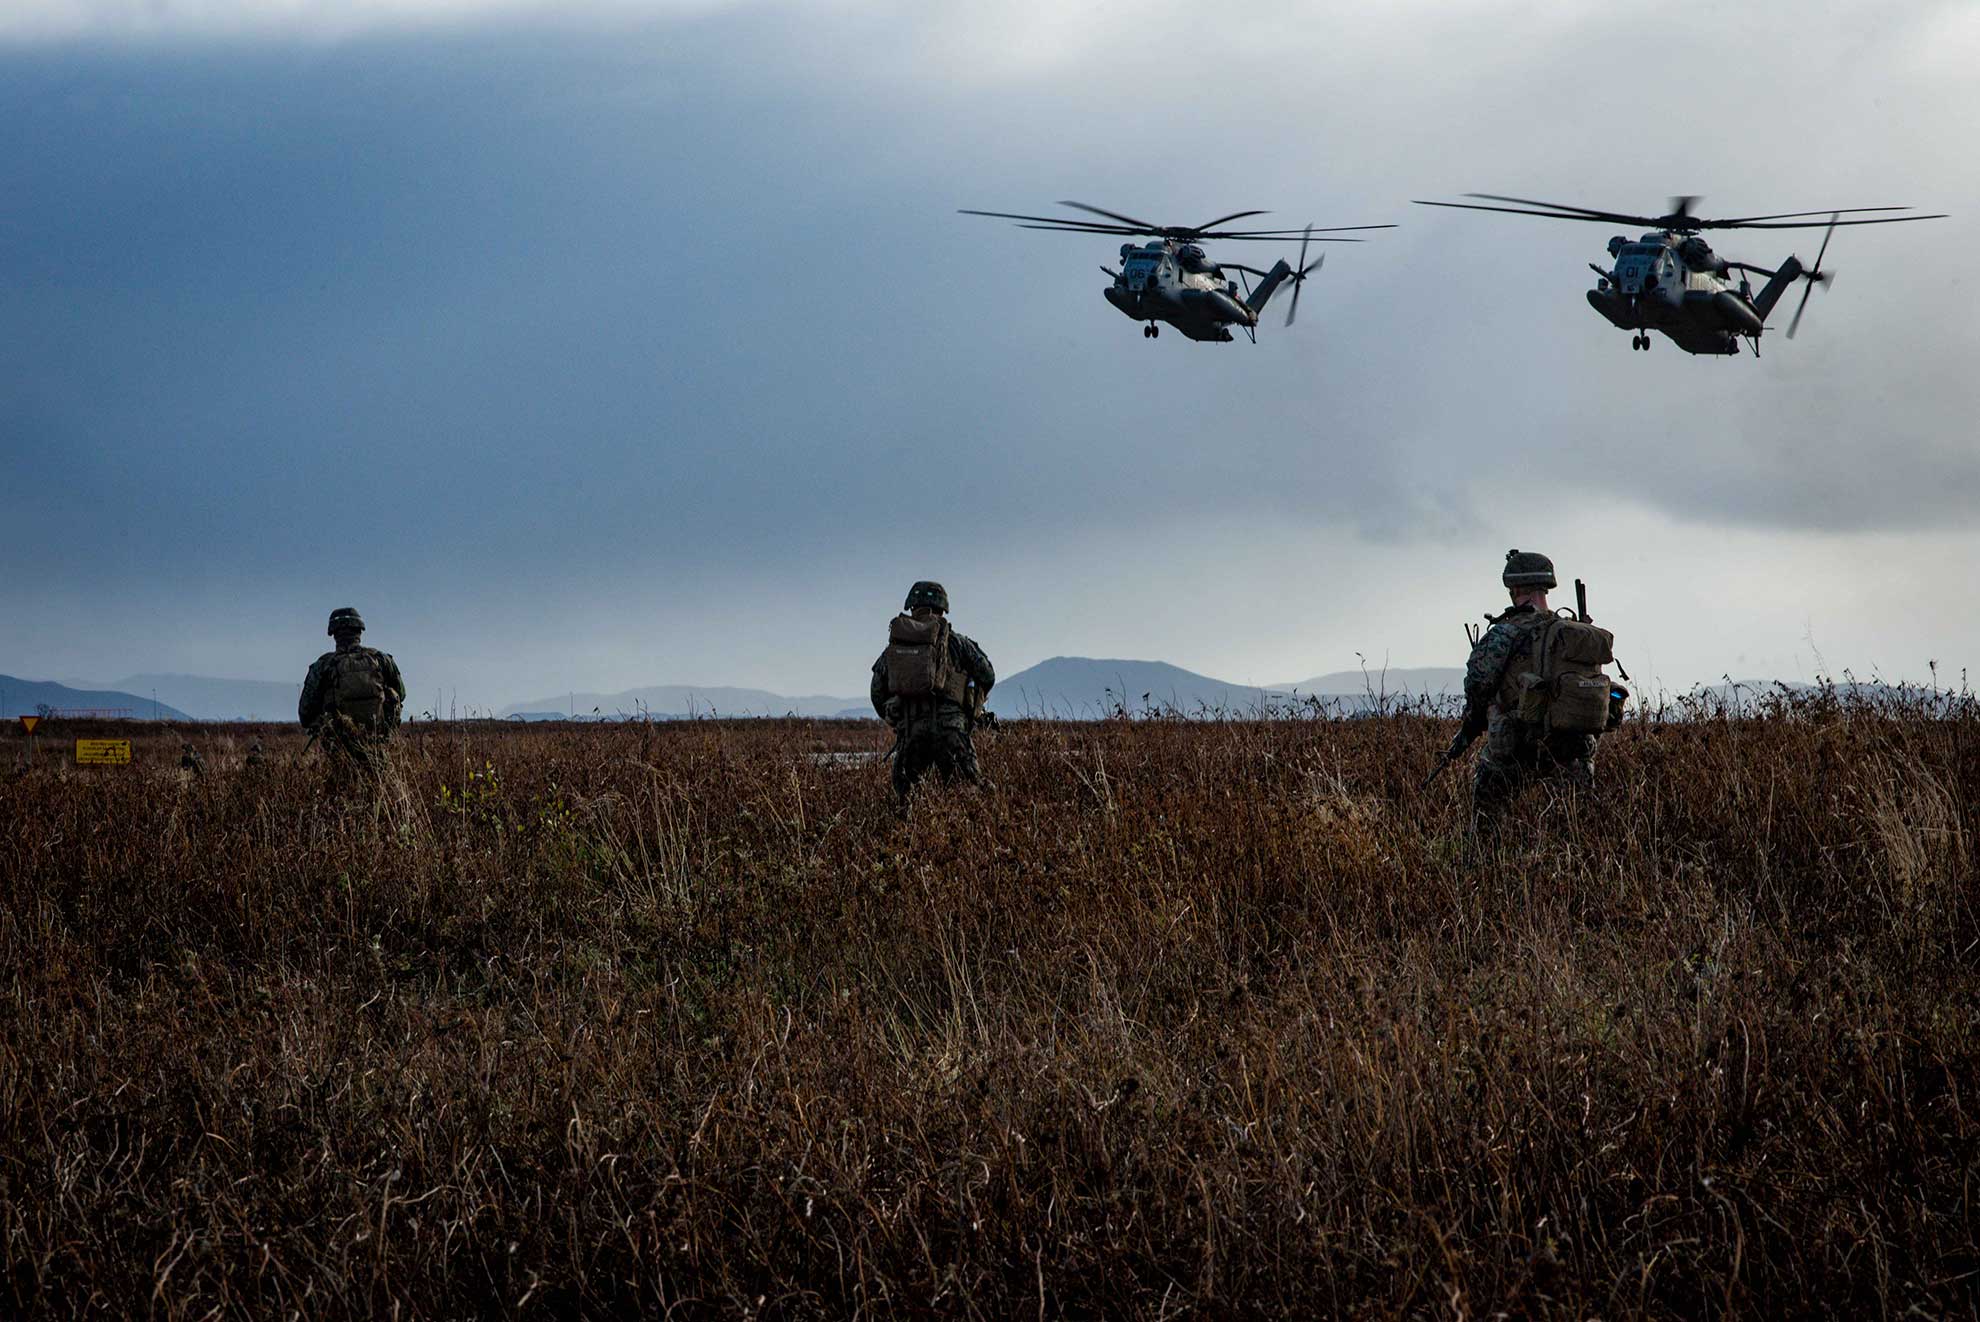 Keflavik, Iceland (Oct. 17, 2018) CH-53 Super Stallion helicopters, assigned to the 24th Marine Expeditionary Unit, prepare to retrieve U.S. Marines during a simulated air assault as part of exercise Trident Juncture 2018 in Keflavik, Iceland, Oct. 17, 2018. Trident Juncture, a NATO-led exercise, hosted by Norway, will include around 50,000 personnel from NATO countries, as well as Finland and Sweden, and will test NATO's collective response to an armed attack against one ally, invoking Article 5 of the North Atlantic Treaty -- U.S. Navy photo by MCS2 Jonathan Nelson -